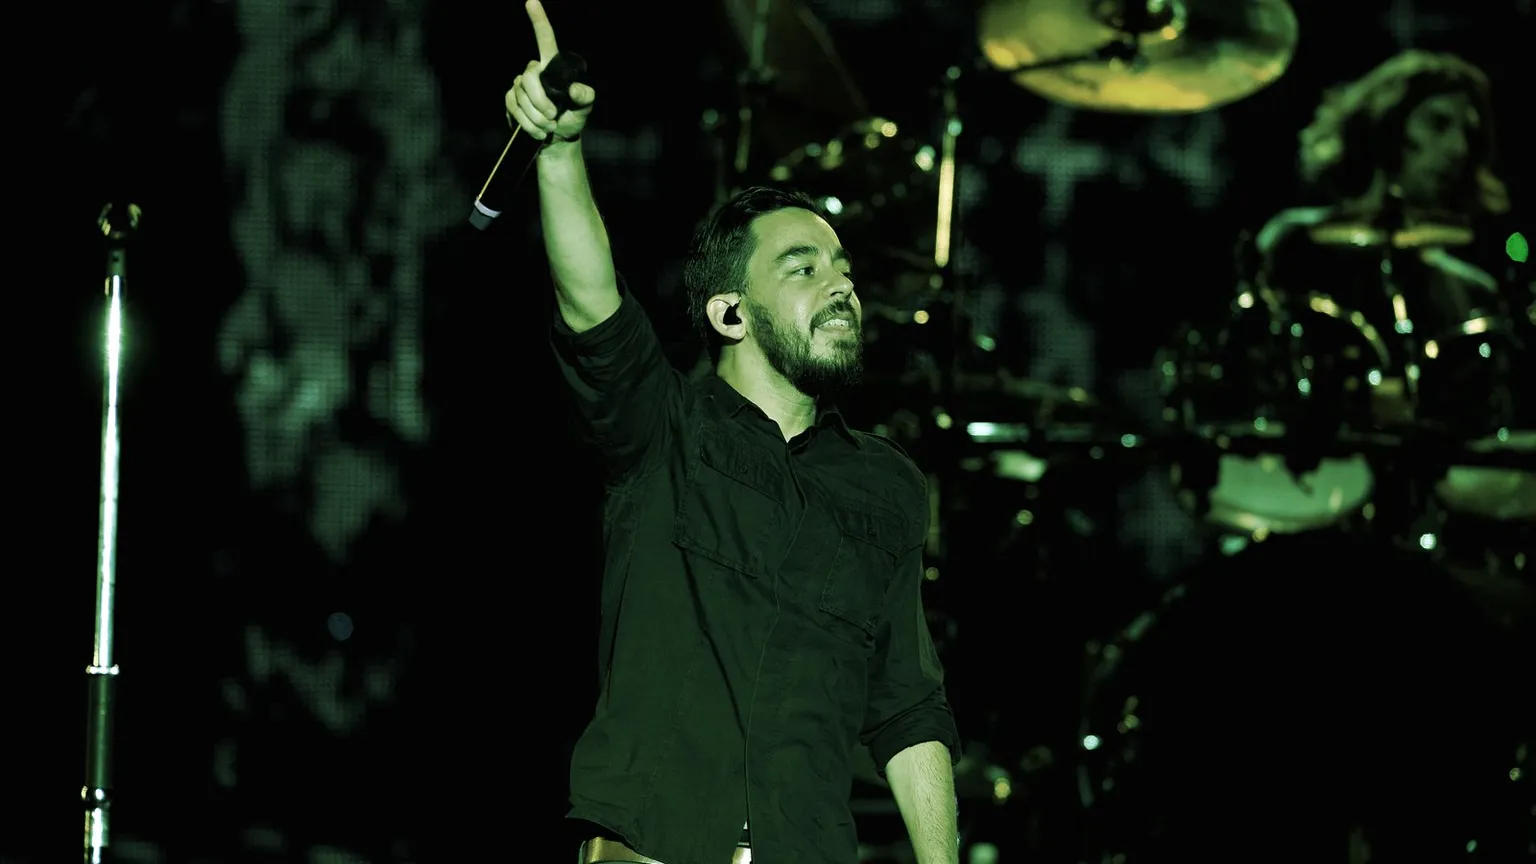 Mike Shinoda on stage. Image: Shutterstock